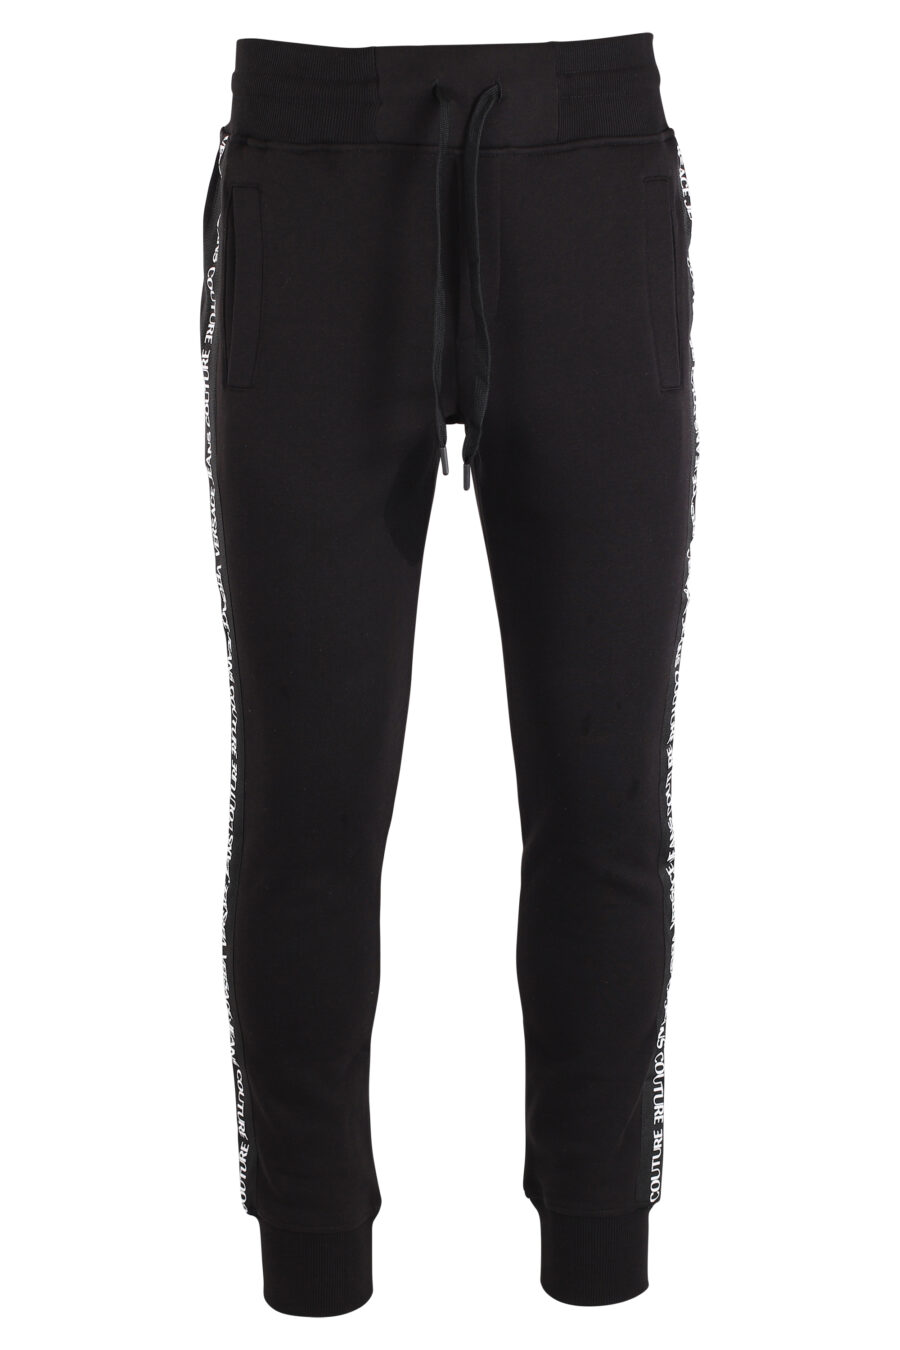 Tracksuit bottoms black with vertical mini logo - IMG 4087